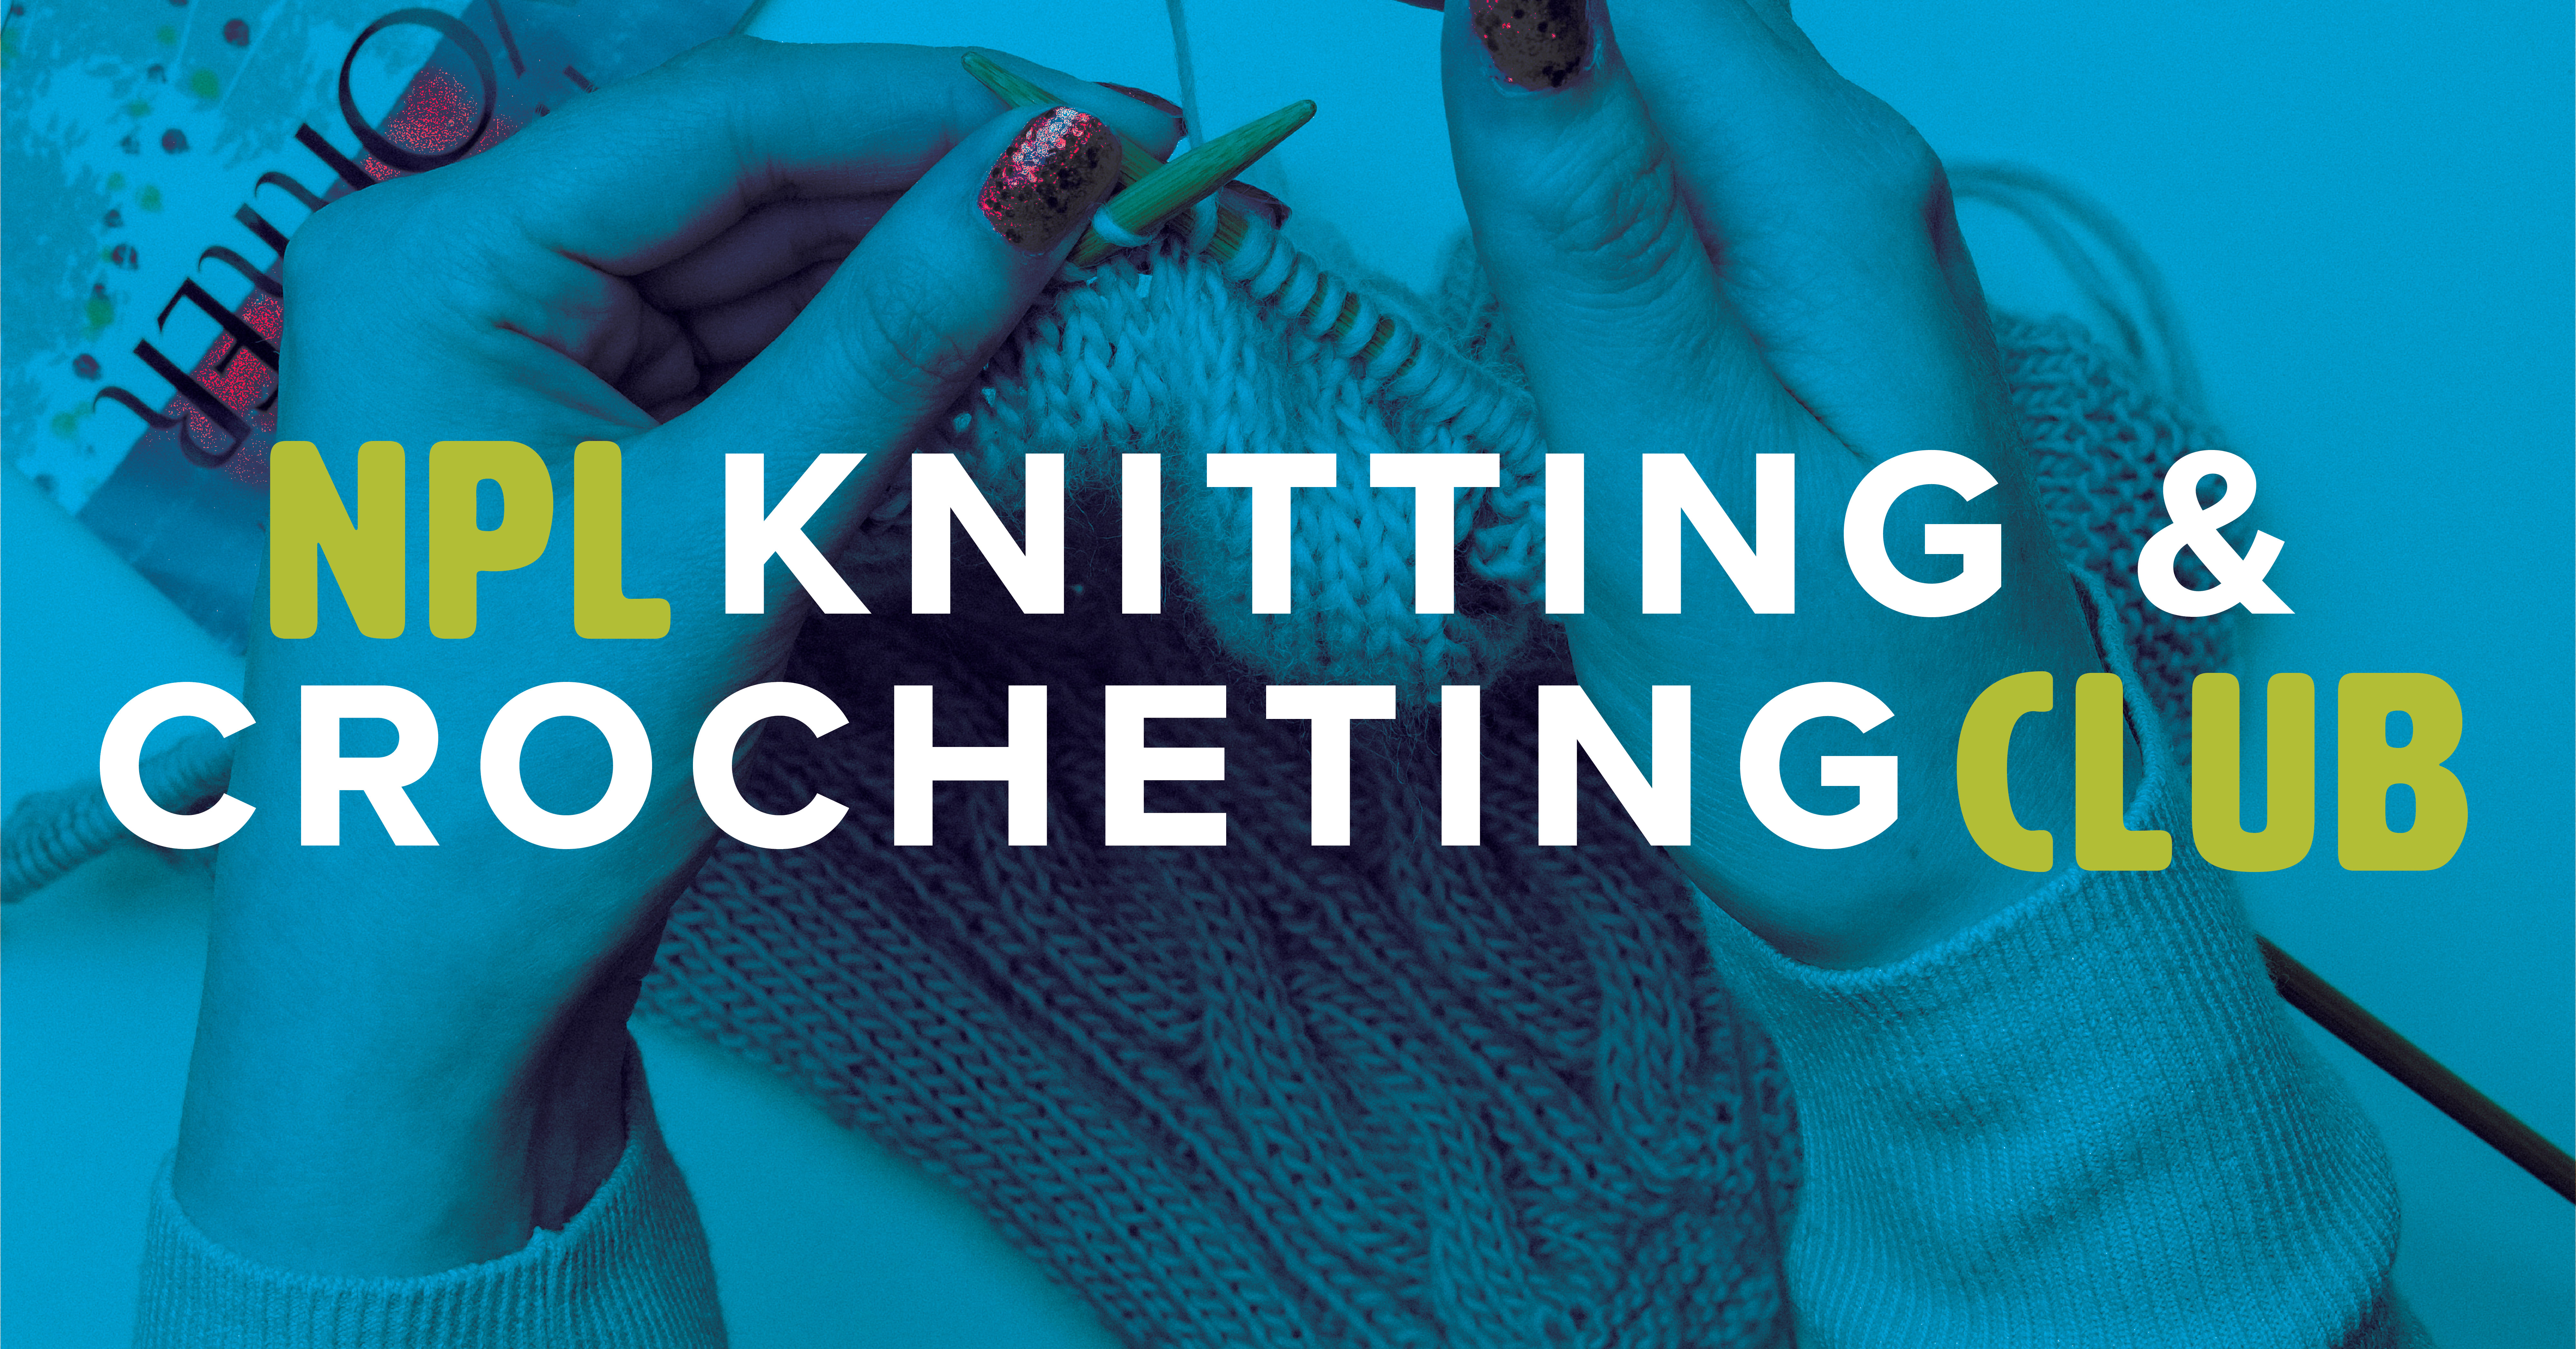 Image for Knitting and Crocheting Club.